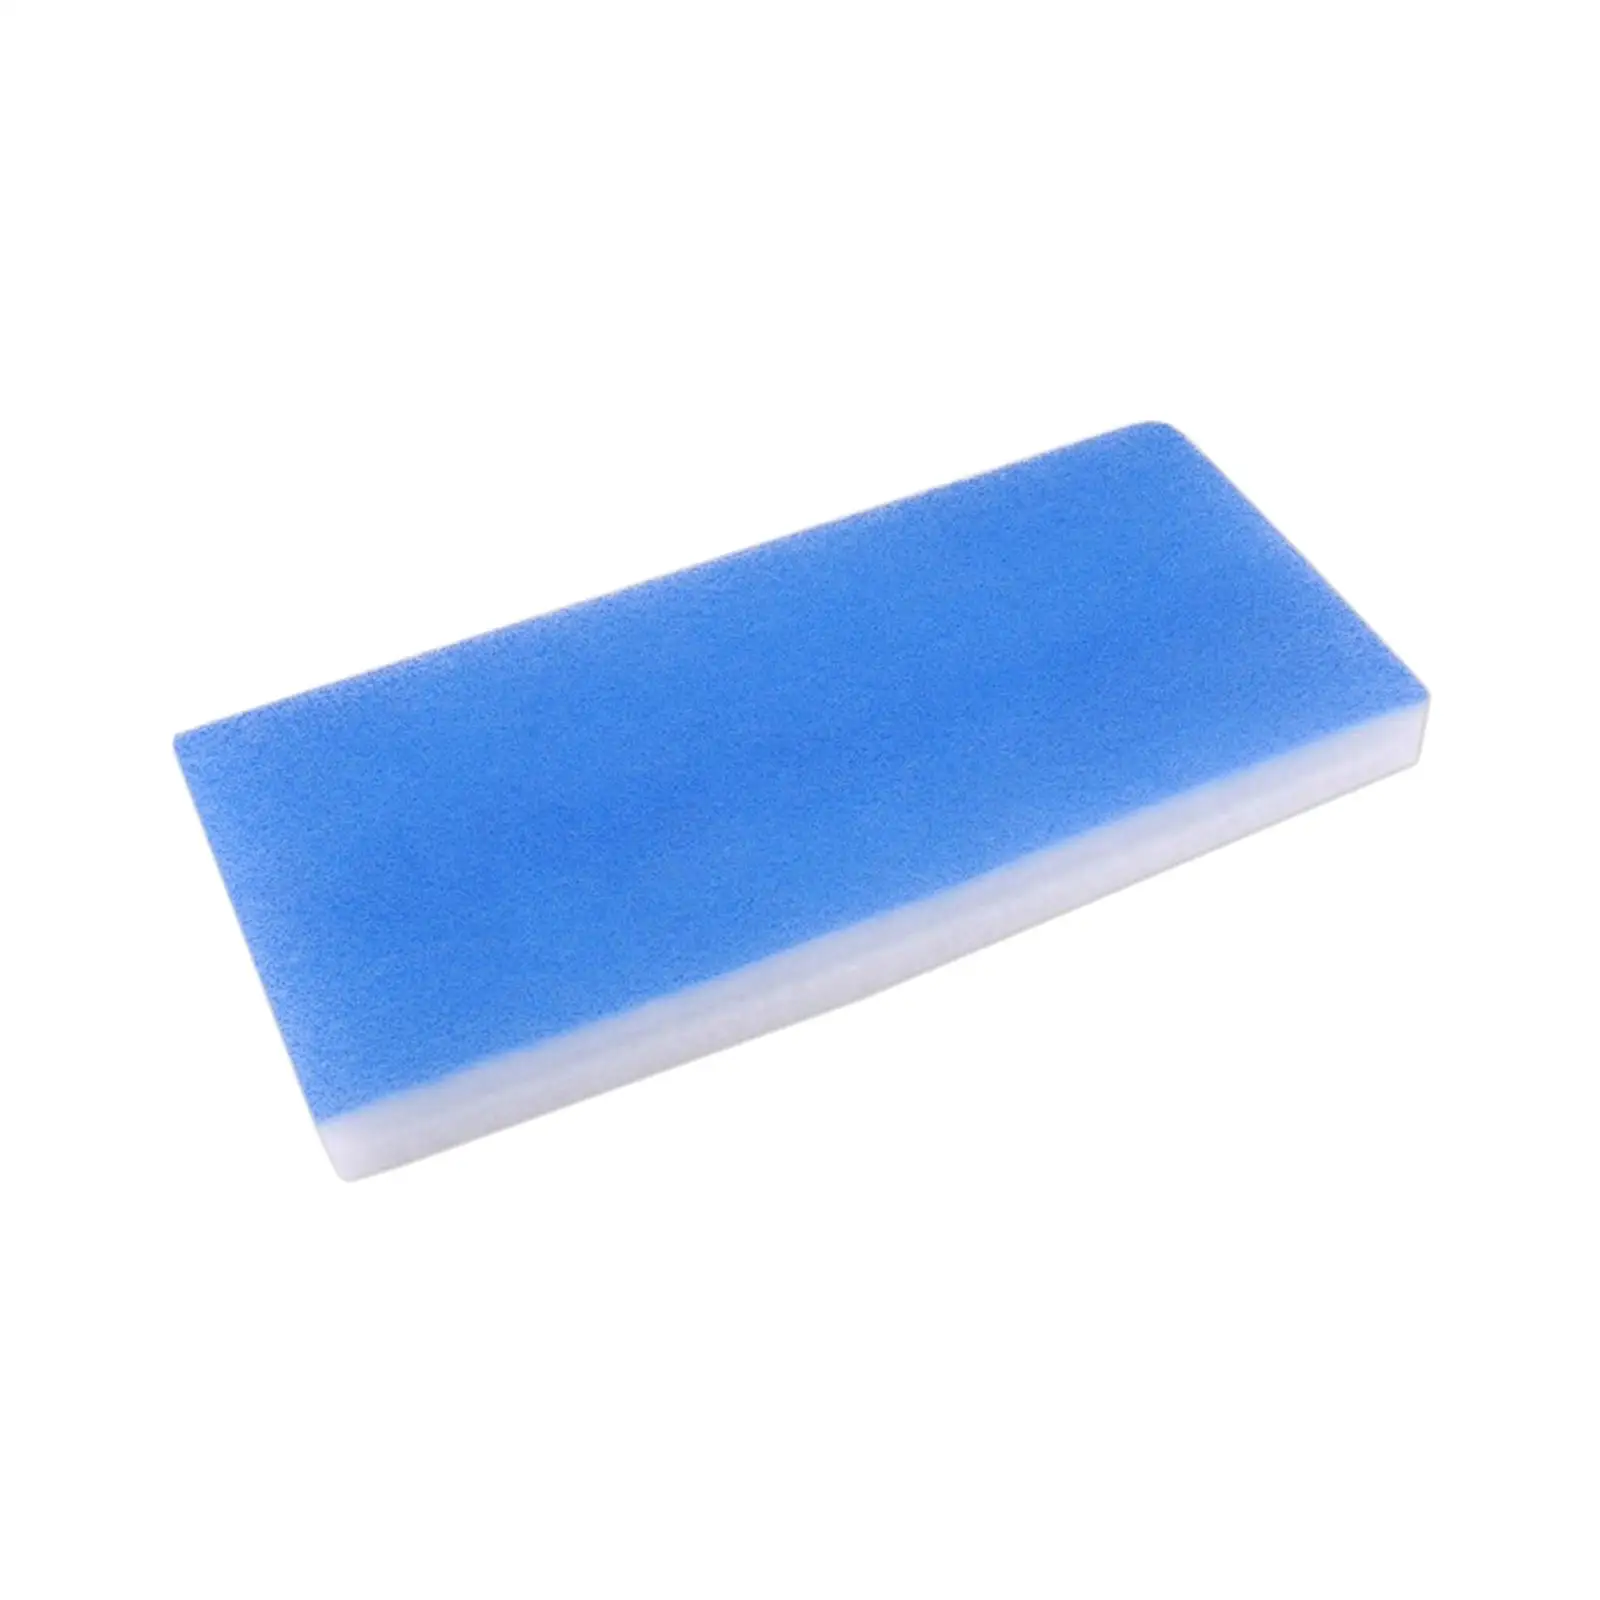 1Pcs Spray Booth Filter Replaceable Fiberglass Filter Pad High Quality Material for Master, Paasche Sky Enterprise, Airhobby